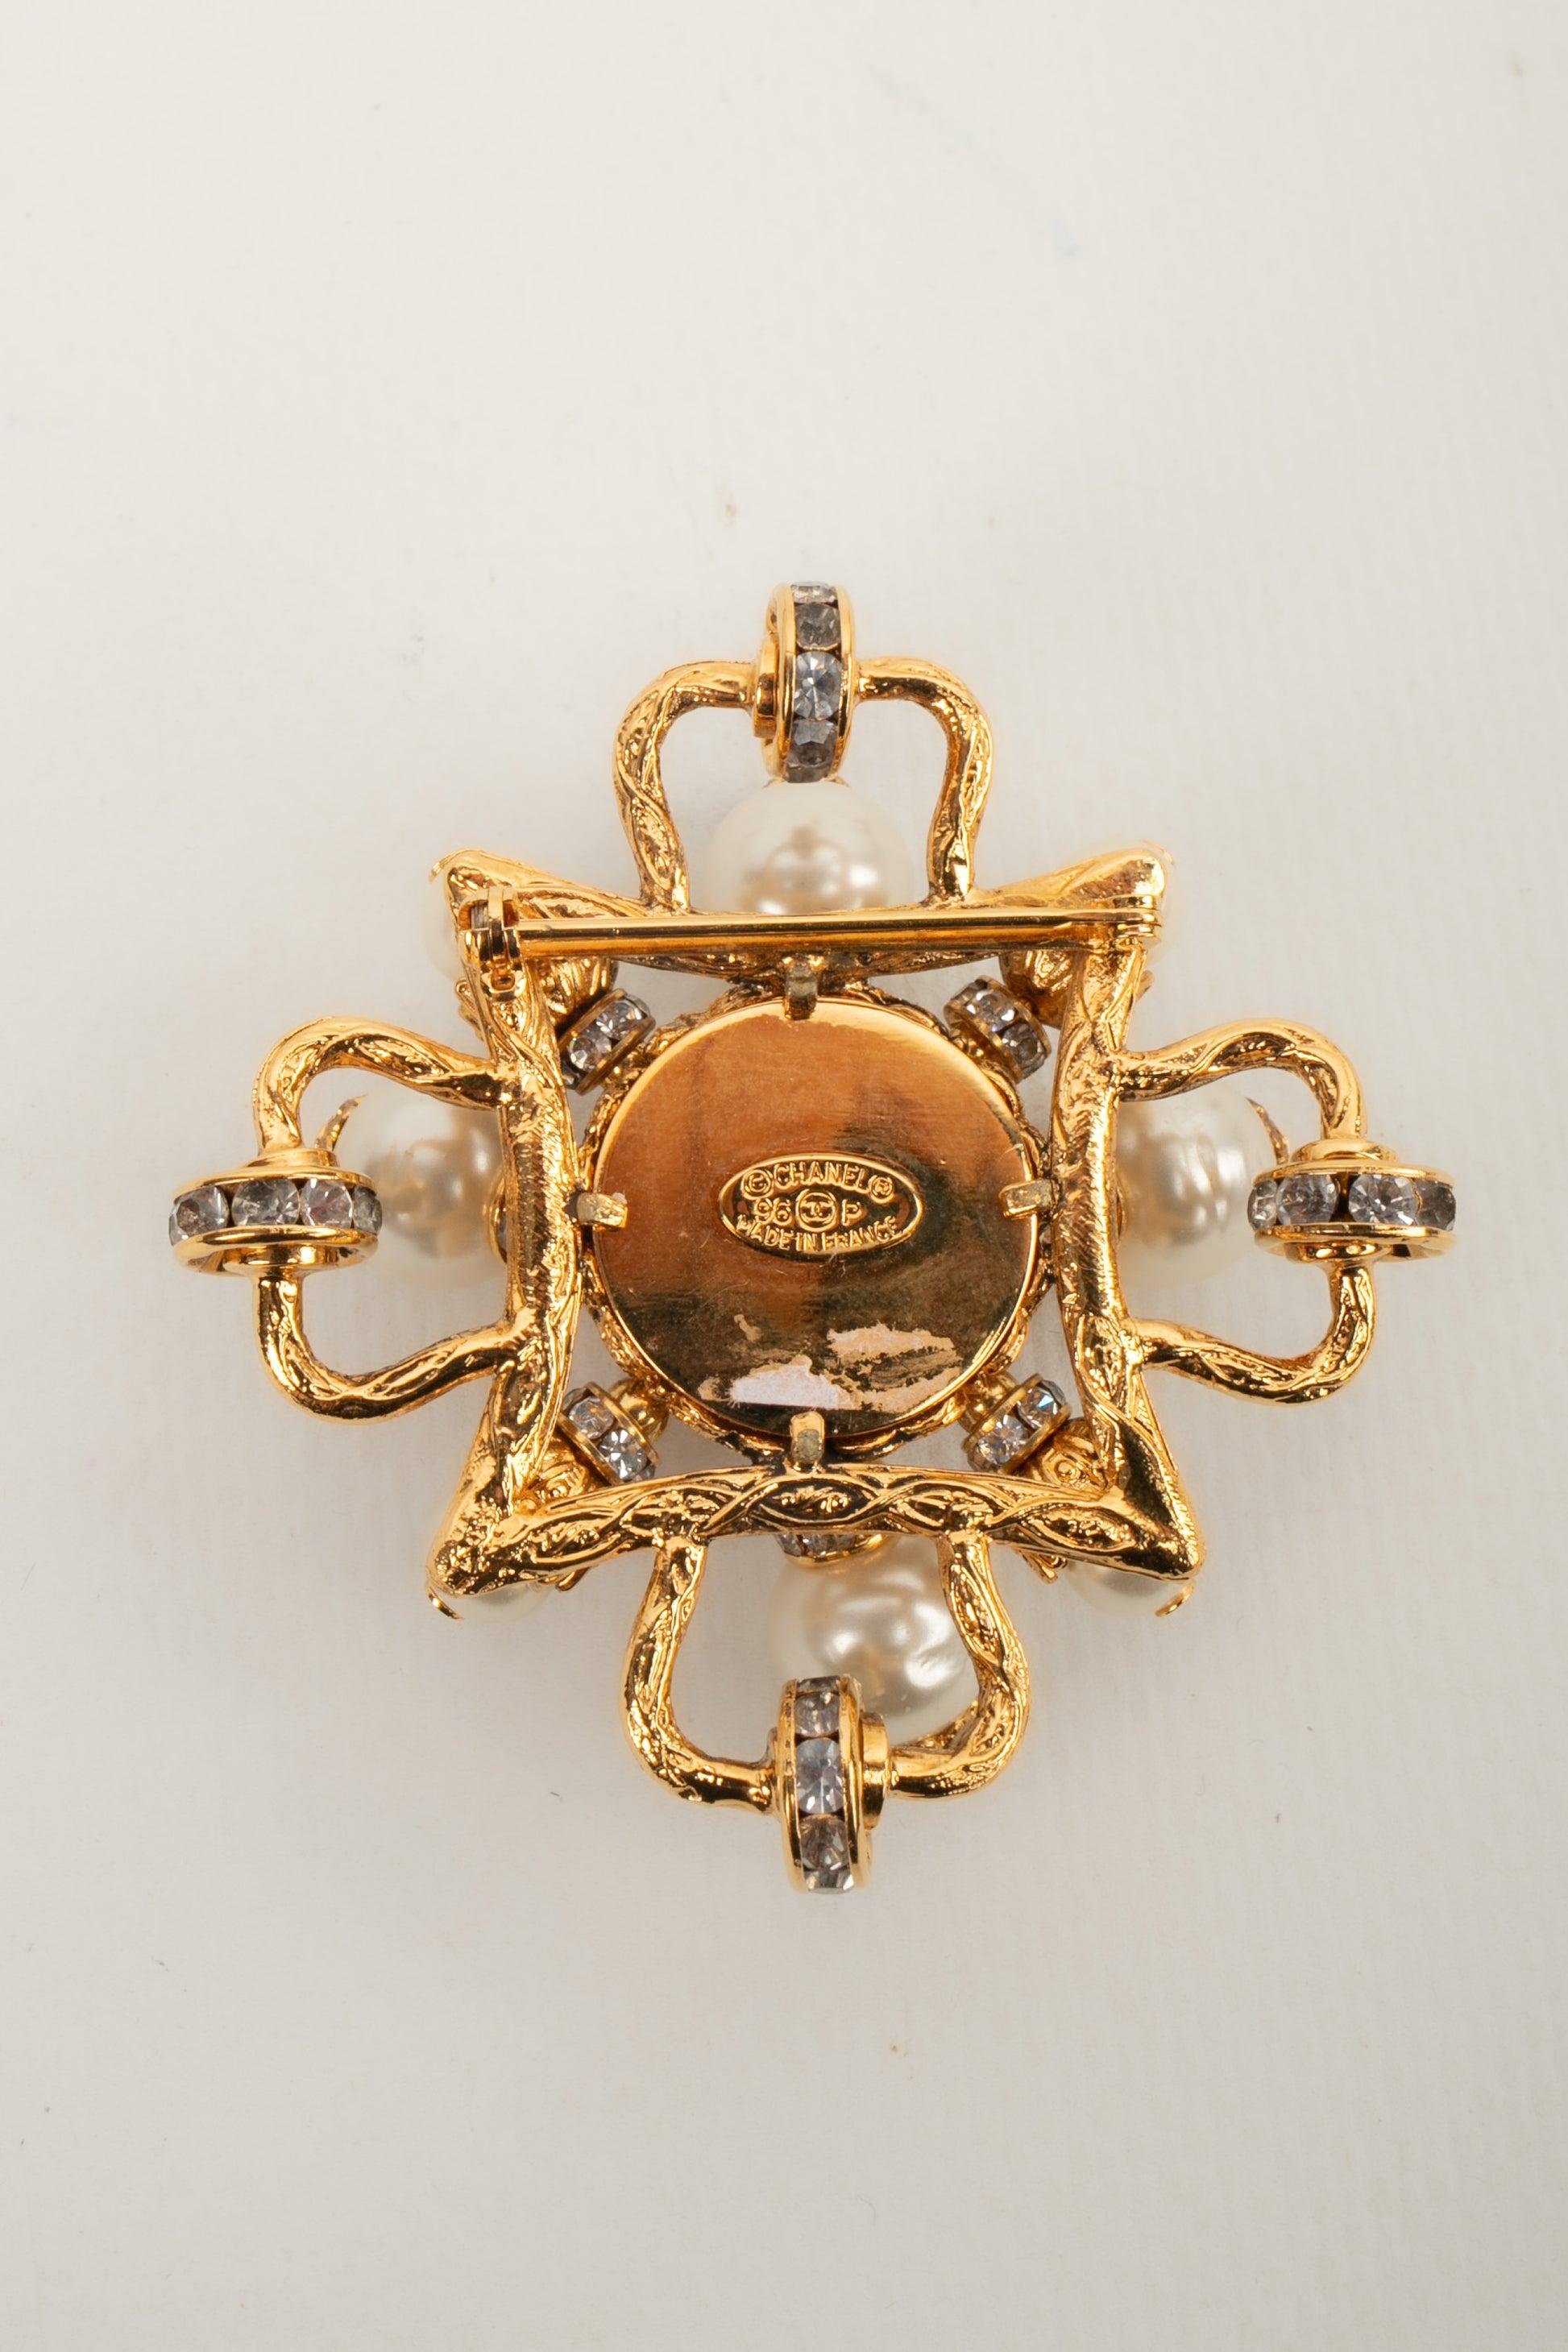 Chanel - (Made in France) Golden metal brooch with costume pearls and rhinestone rings. 1996 Spring-Summer Collection.

Additional information:
Condition: Very good condition
Dimensions: Height: 6 cm
Period: 20th Century

Seller Reference: BRB158
